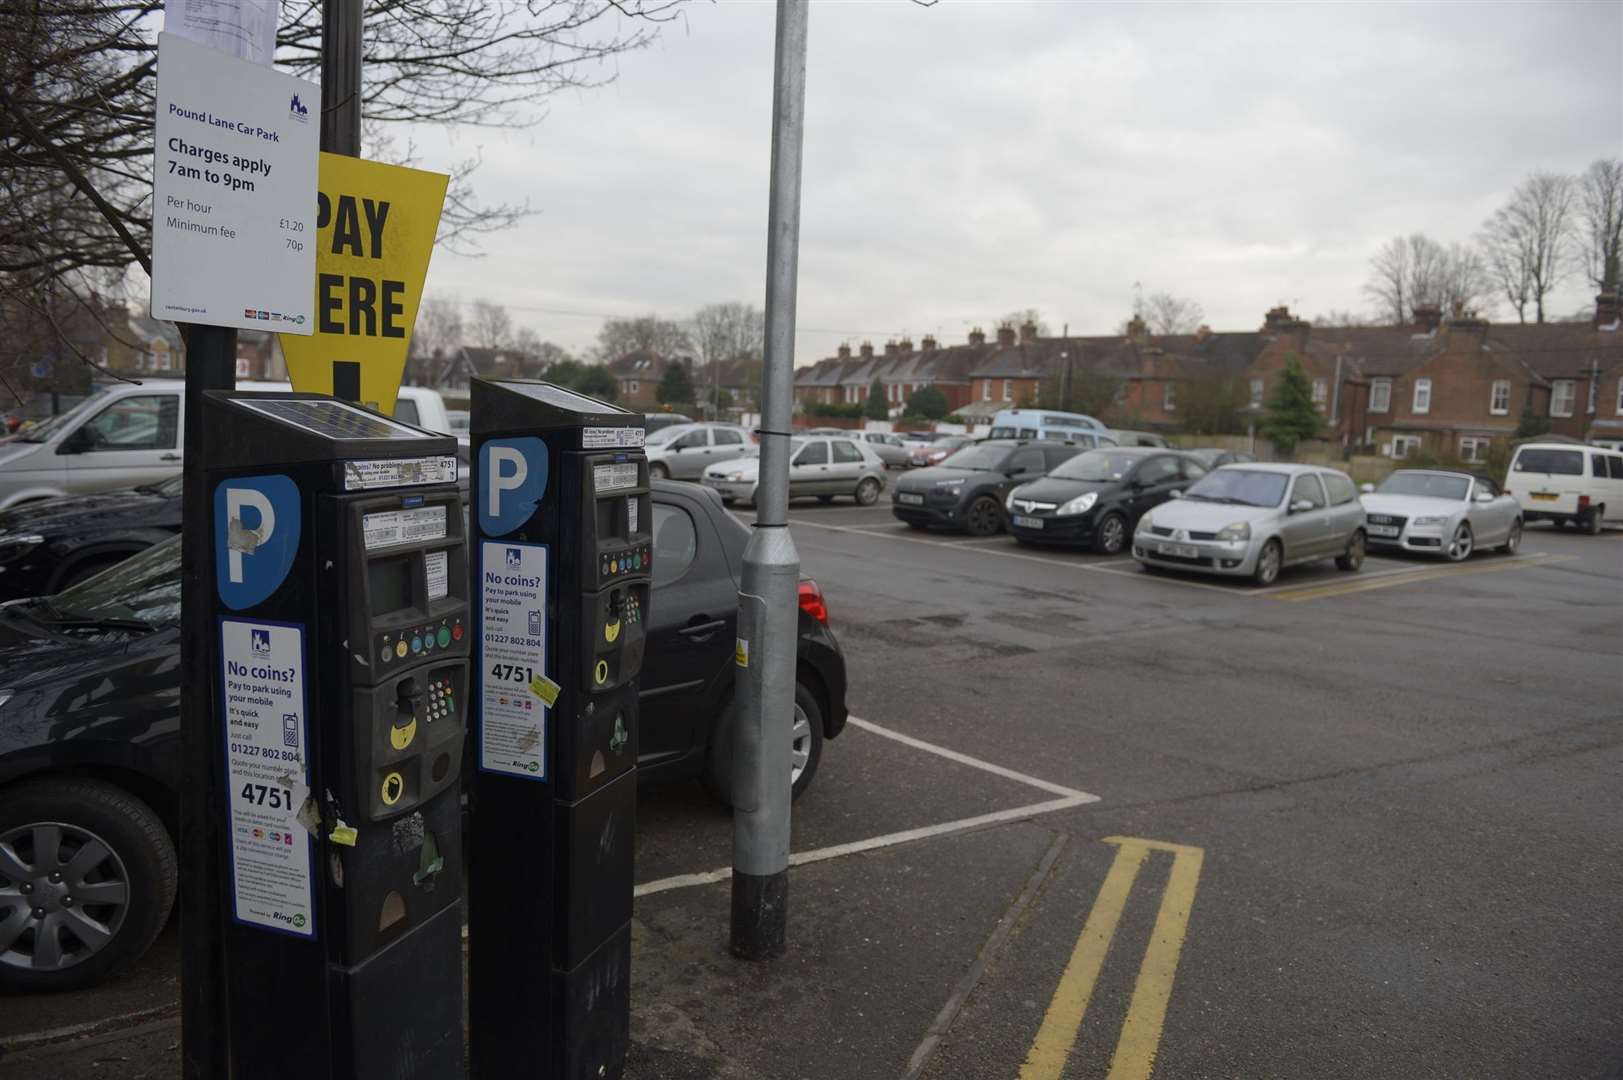 Pound Lane car park in Canterbury has been turned into an ANPR-controlled parking area. Picture: Barry Goodwin